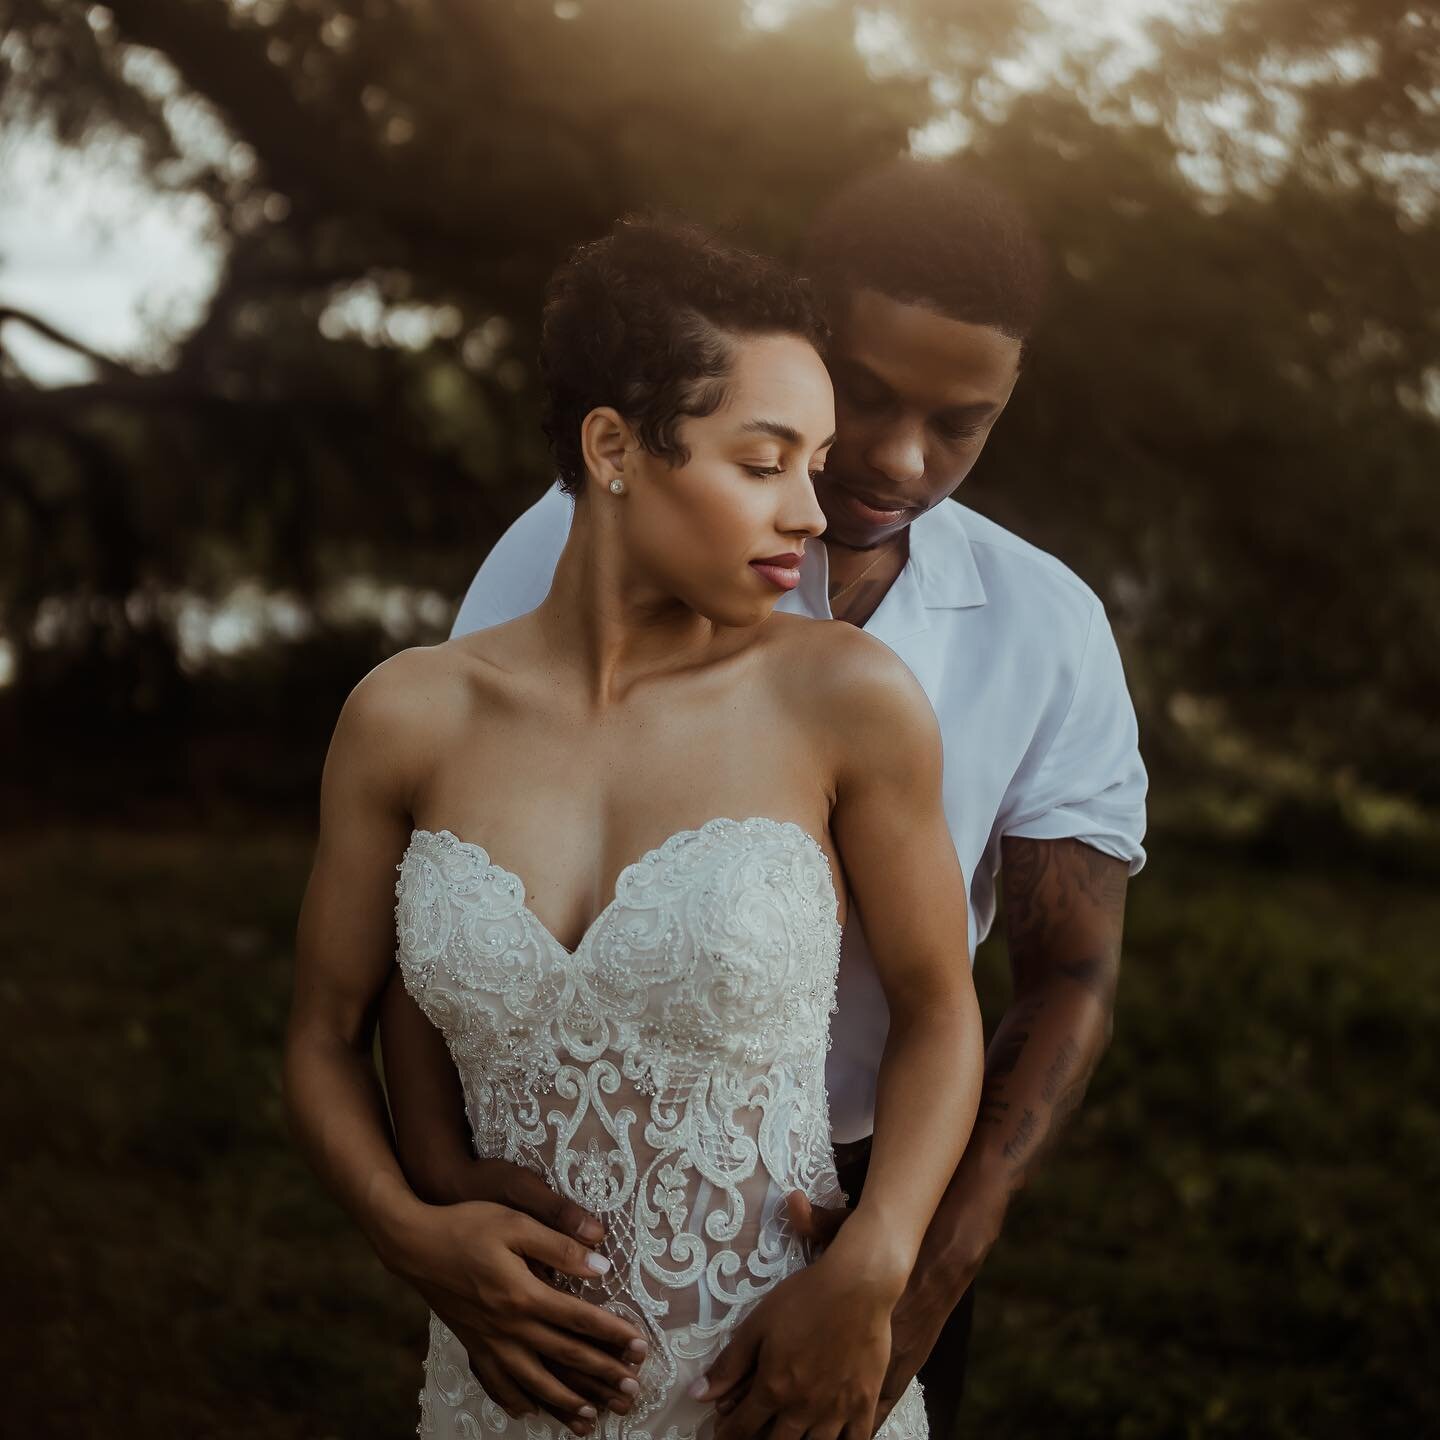 These two are 🔥🔥🔥
At Camp @unraveledacademy one of the exercises was to capture this wedding couple at high sun with a partner and you had one minute to get creative and grab your shots. I love working under pressure, trying new things, and seeing